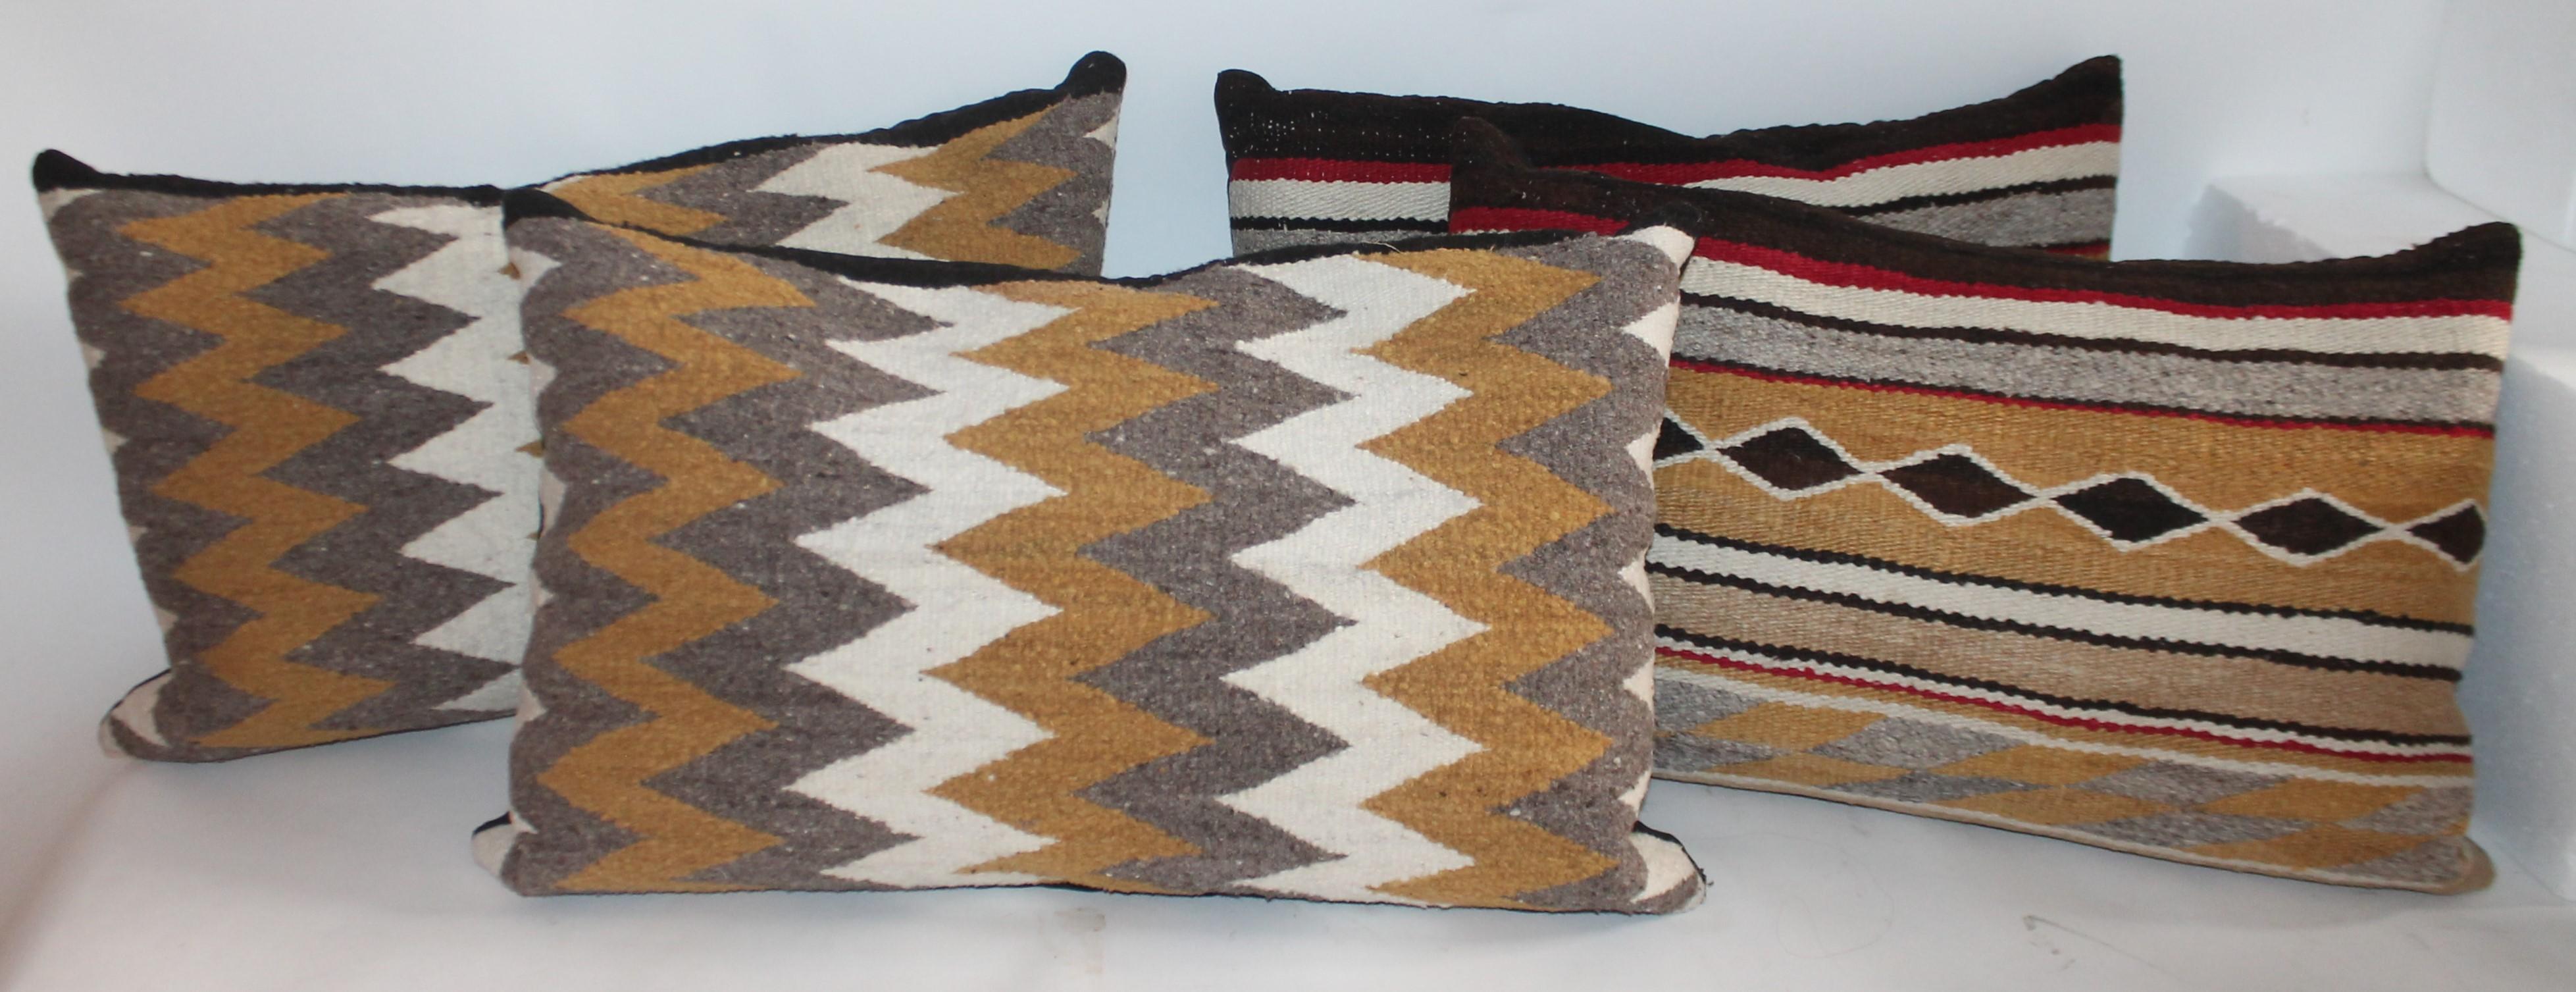 These fine Navajo Indian weaving pillows are being sold in a group of four pillows. One pair is streak of lighting pattern and second pair is diamond bars. Both pairs are normally 995.00 a pair. Special deal is for both pairs.